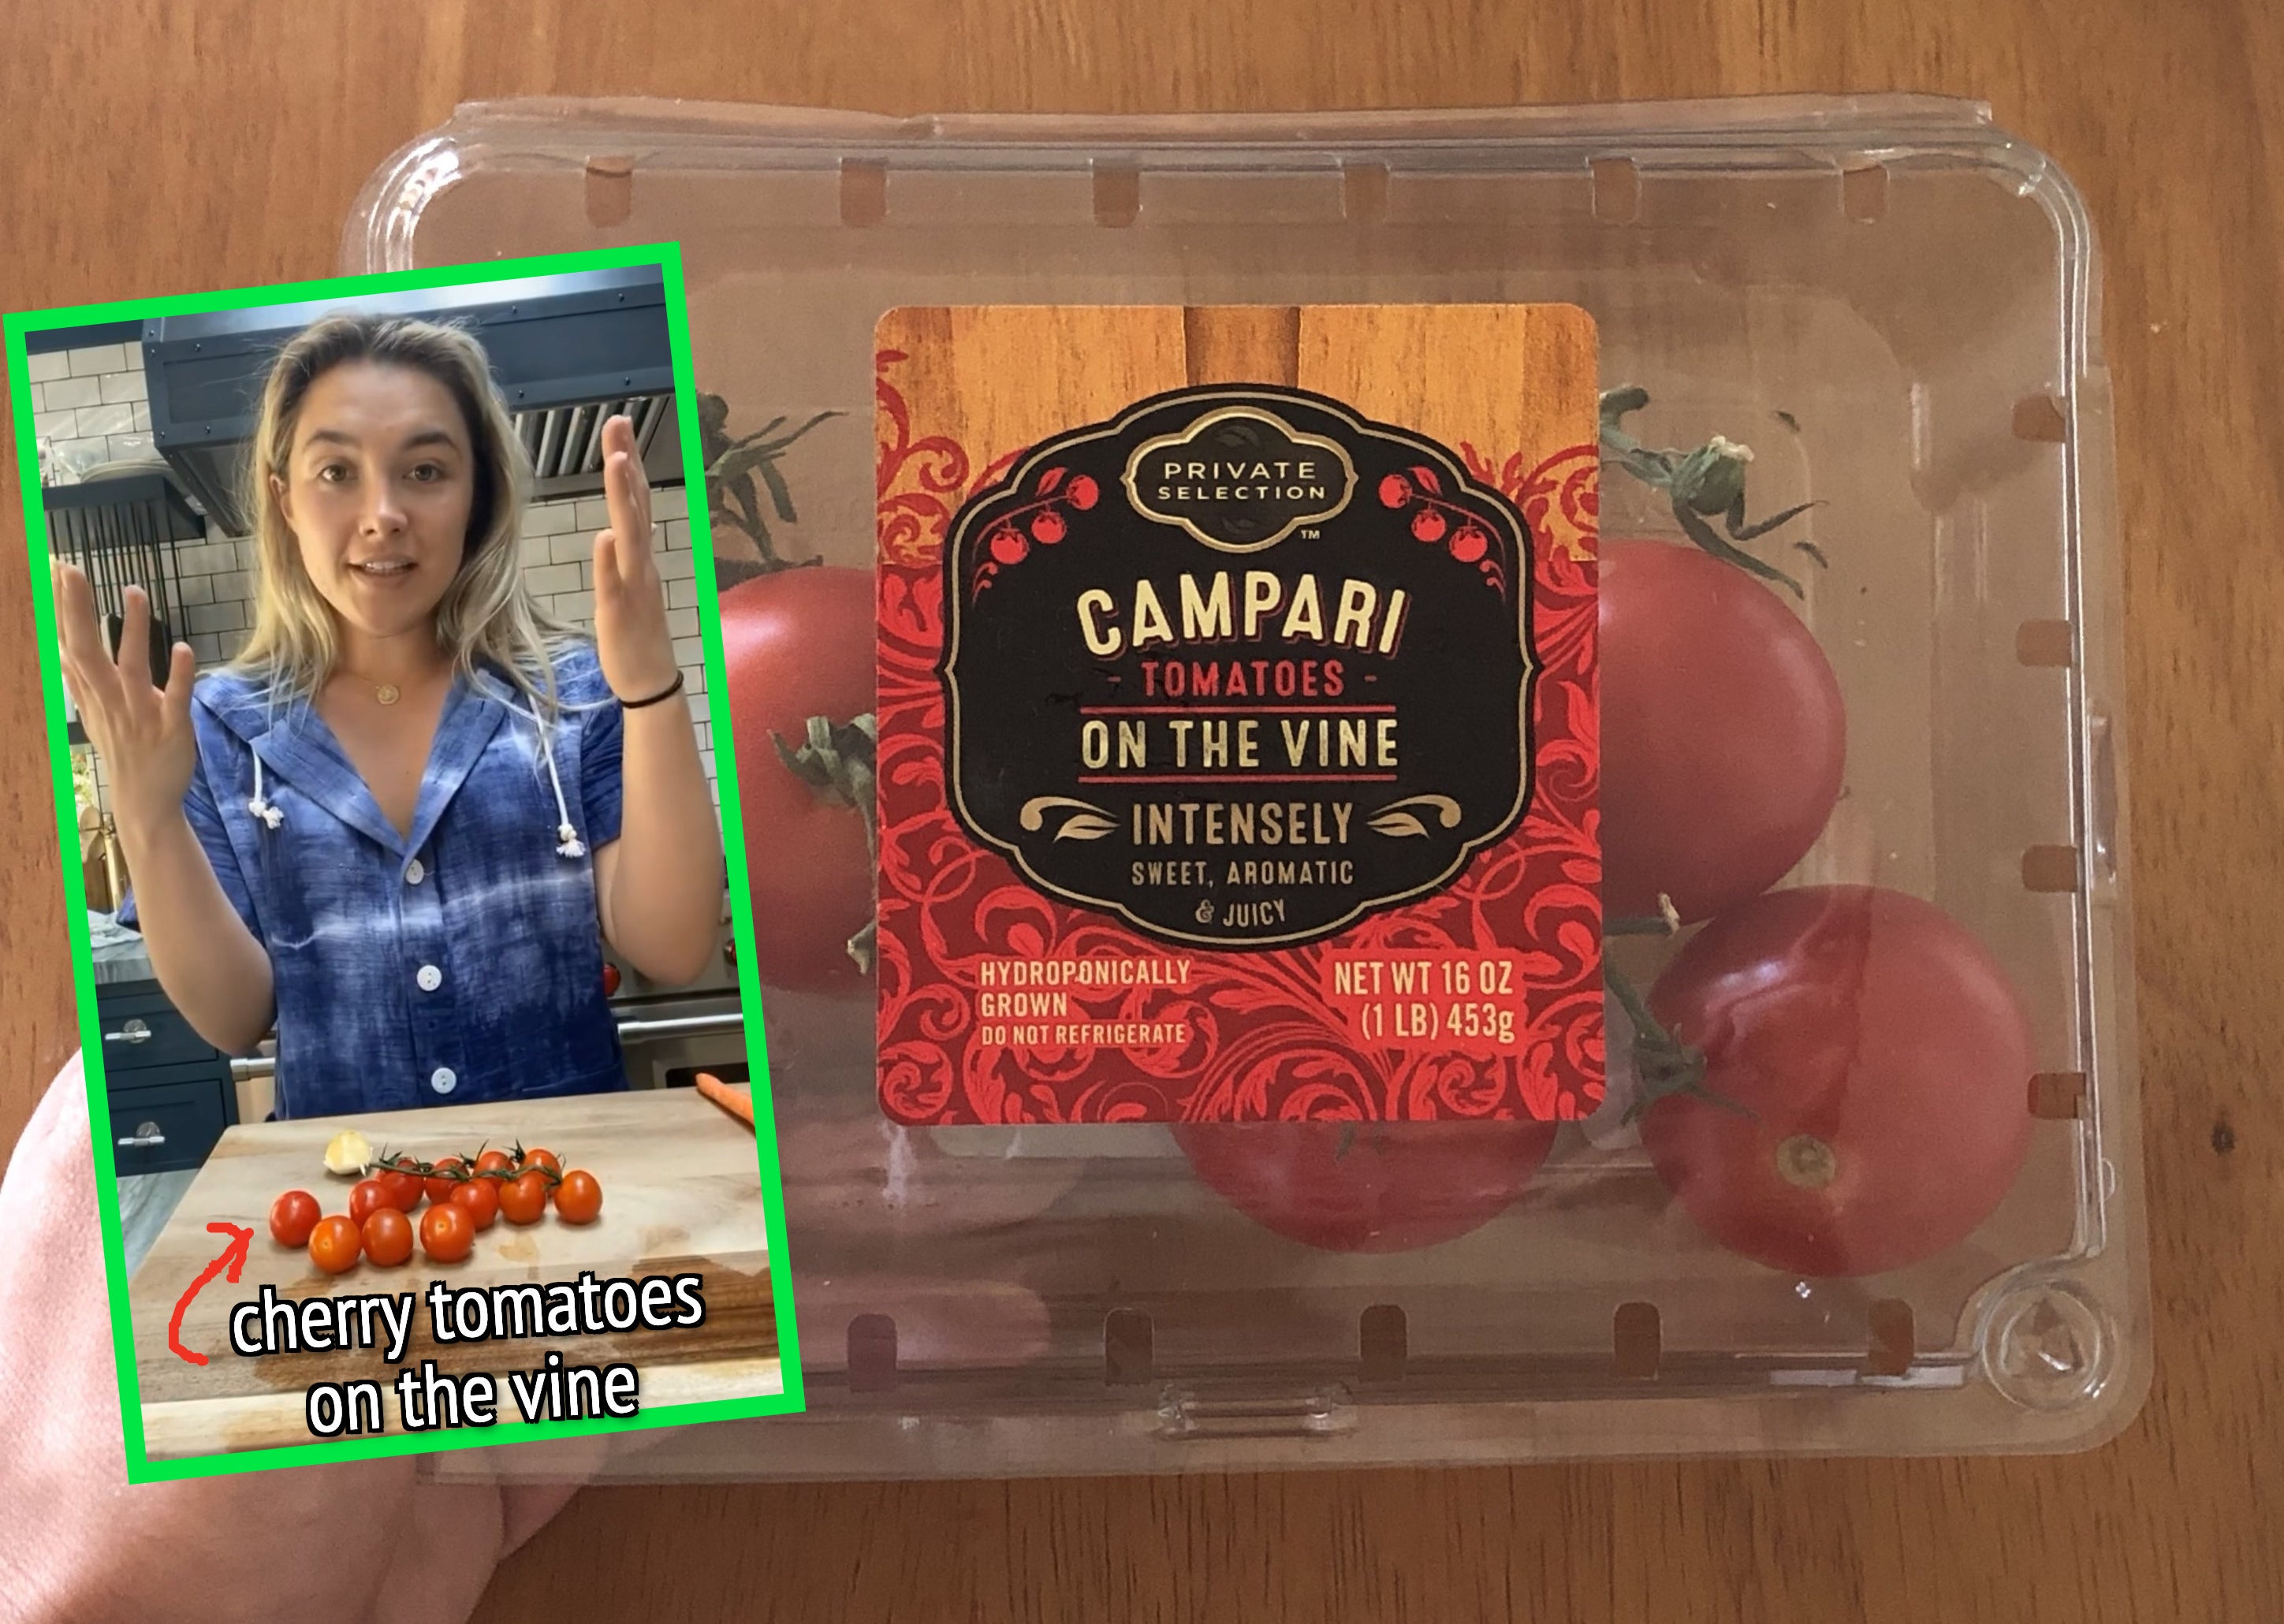 (inset) Florence Pugh with cherry tomatoes (background) tomatoes on the vine